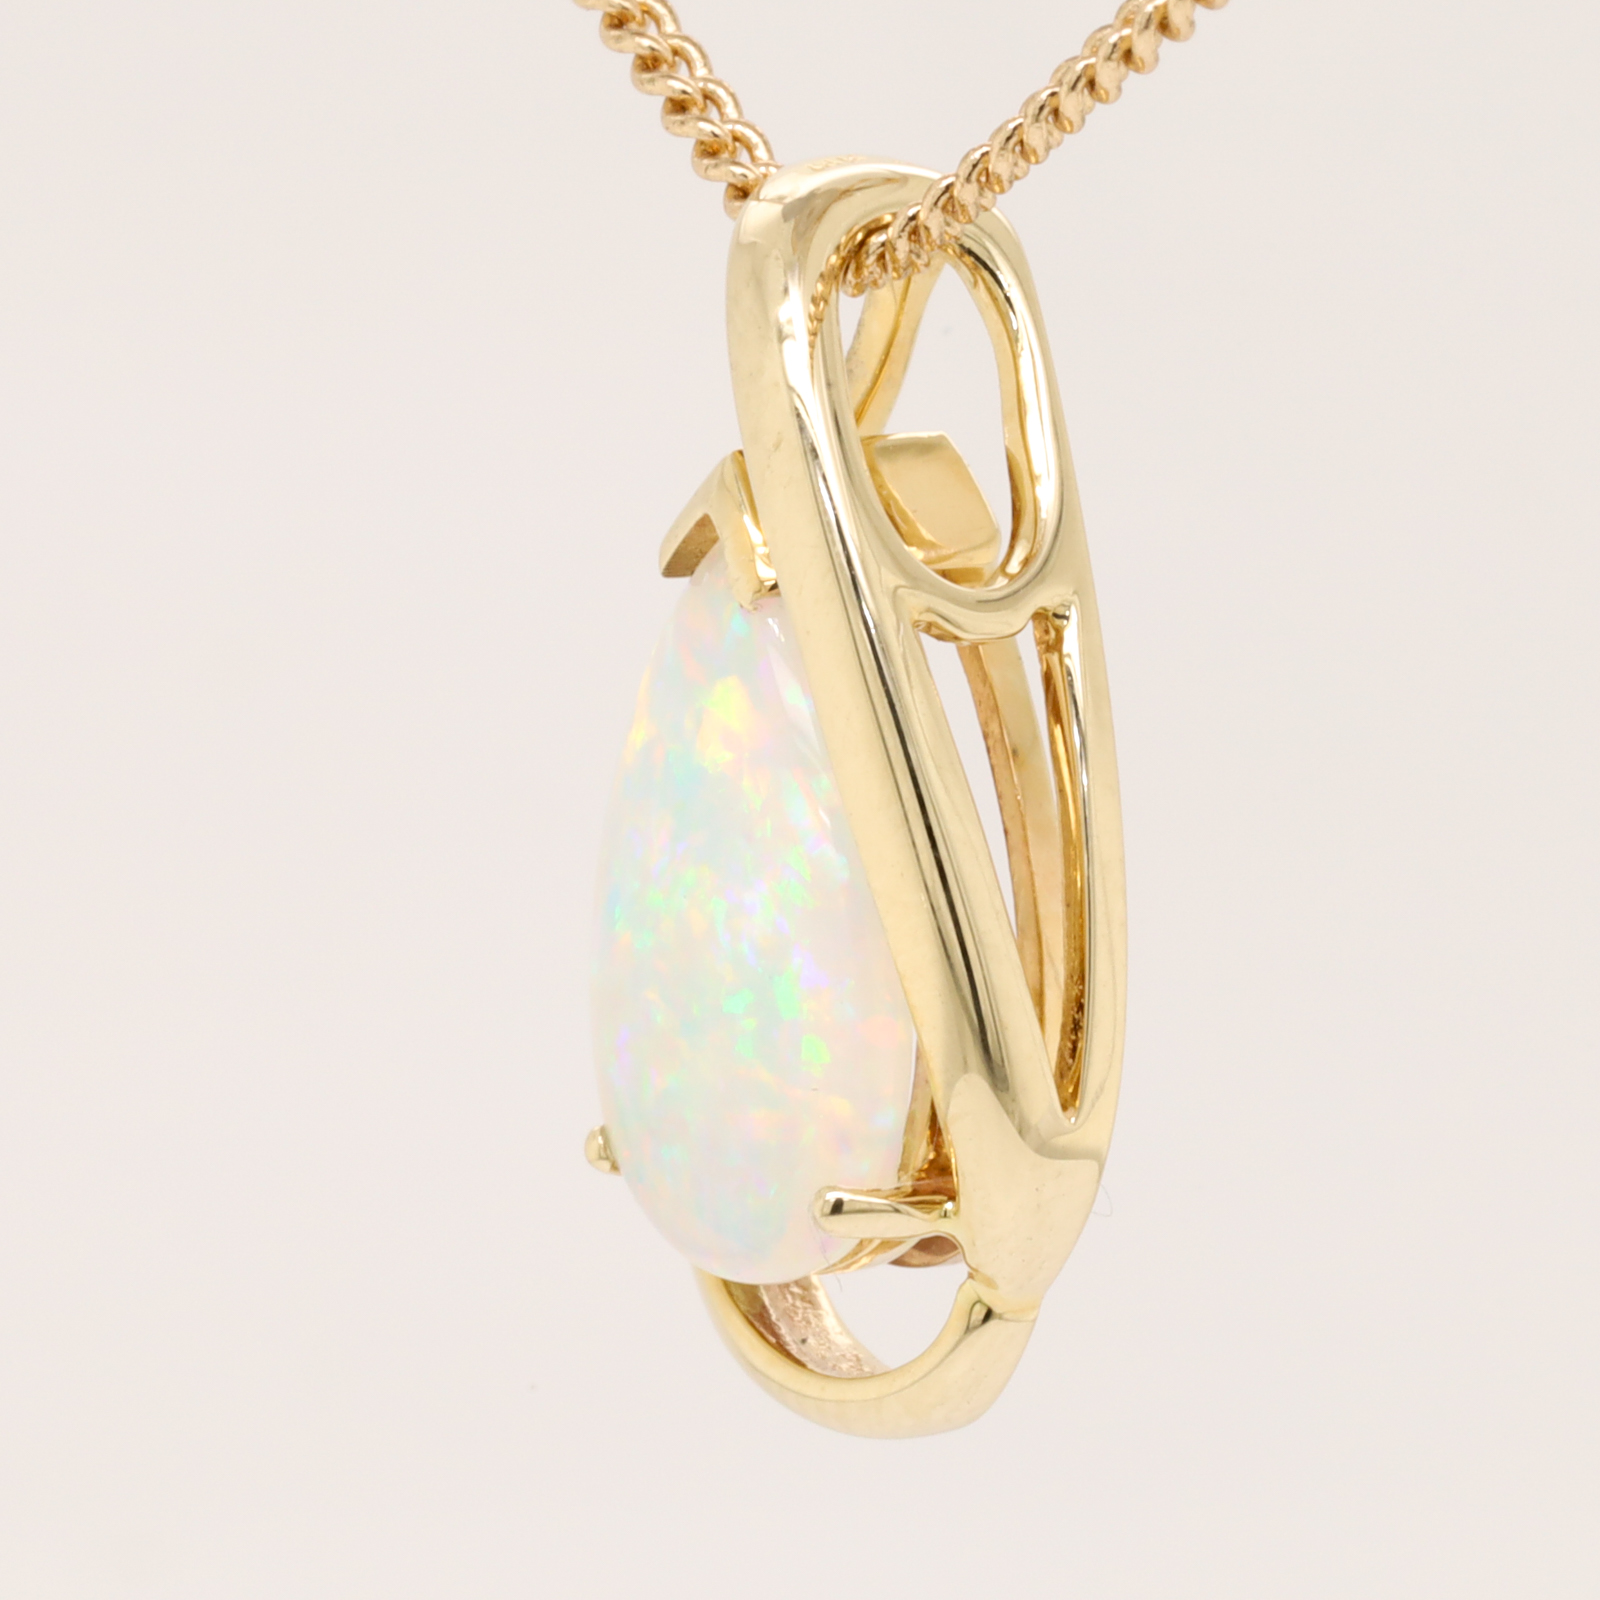 Blue Pink and Green Yellow Gold Solid Australian Crystal Opal Necklace Pendant